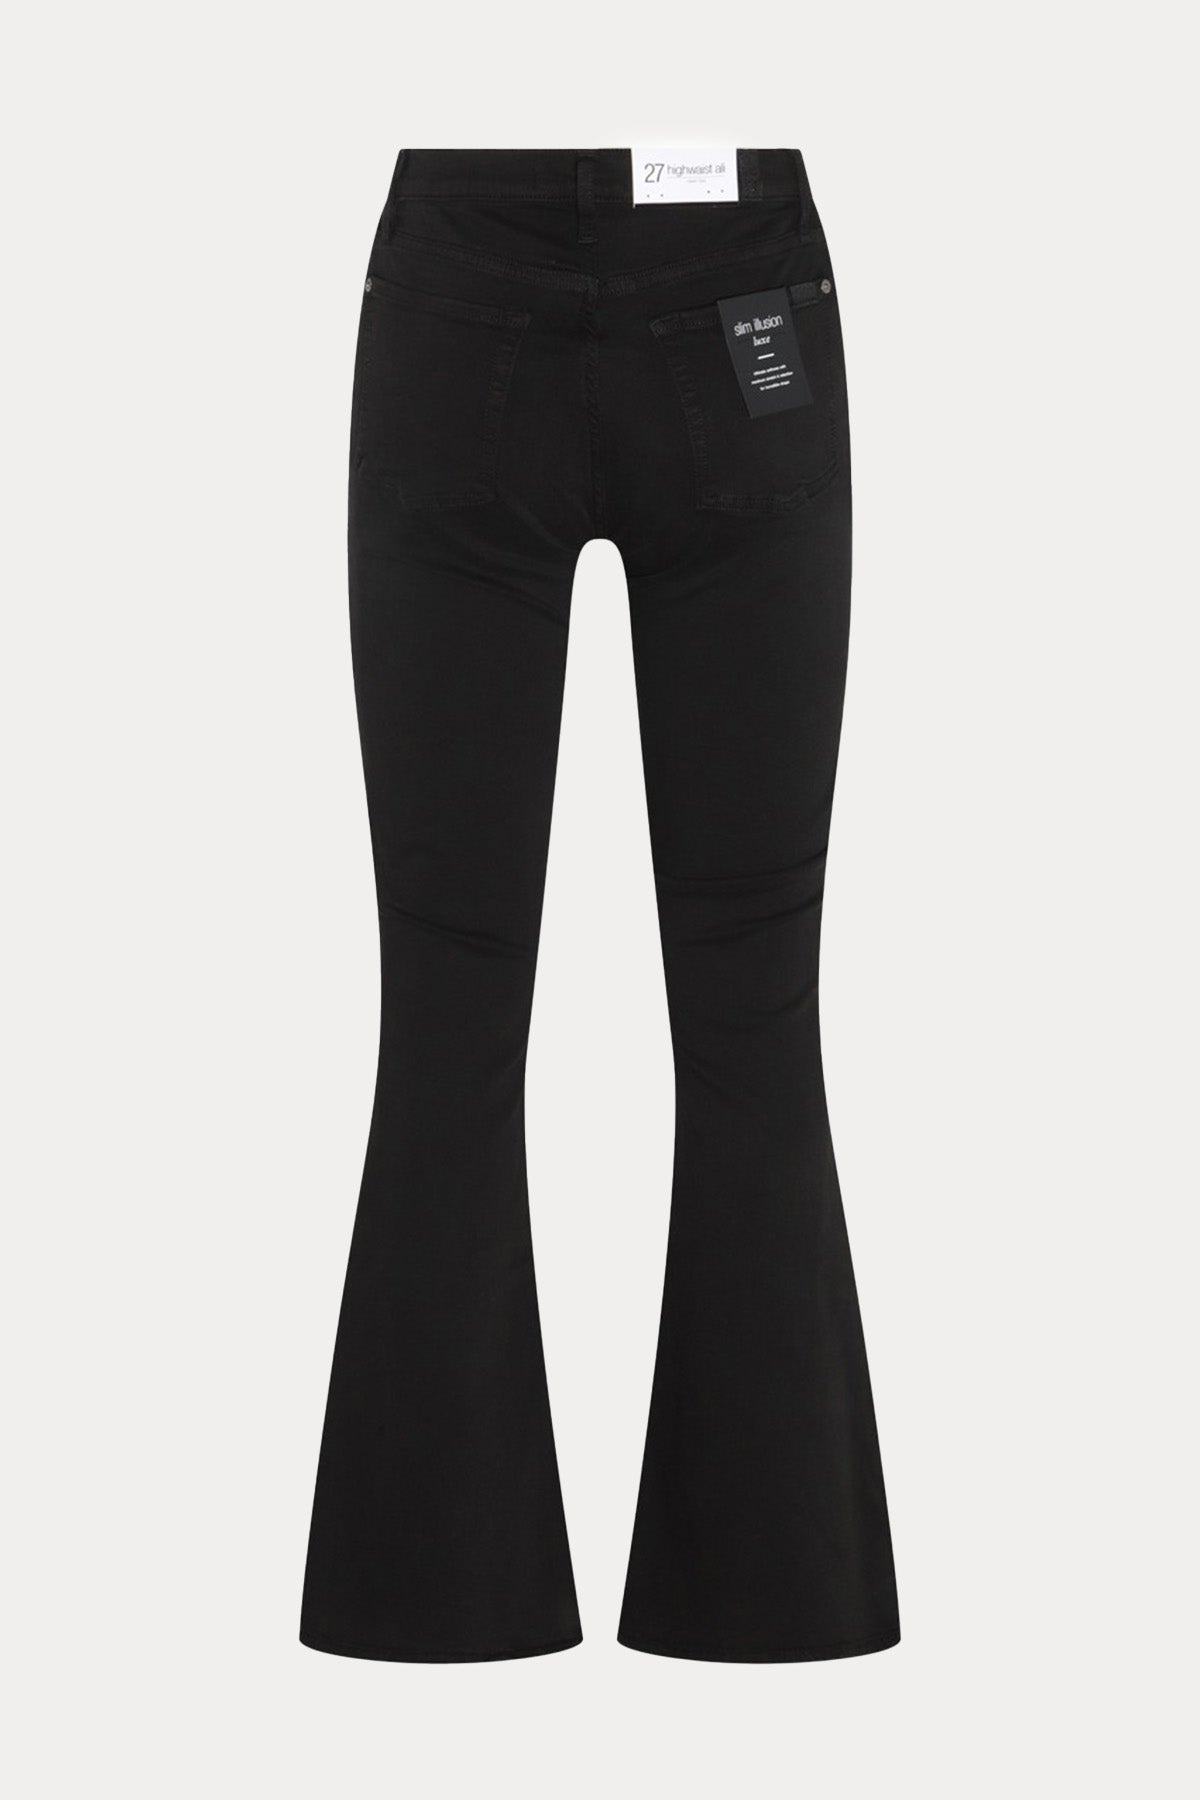 7 For All Mankind Hw Ali Slim Illusion Luxe Flare İspanyol Paça Jeans